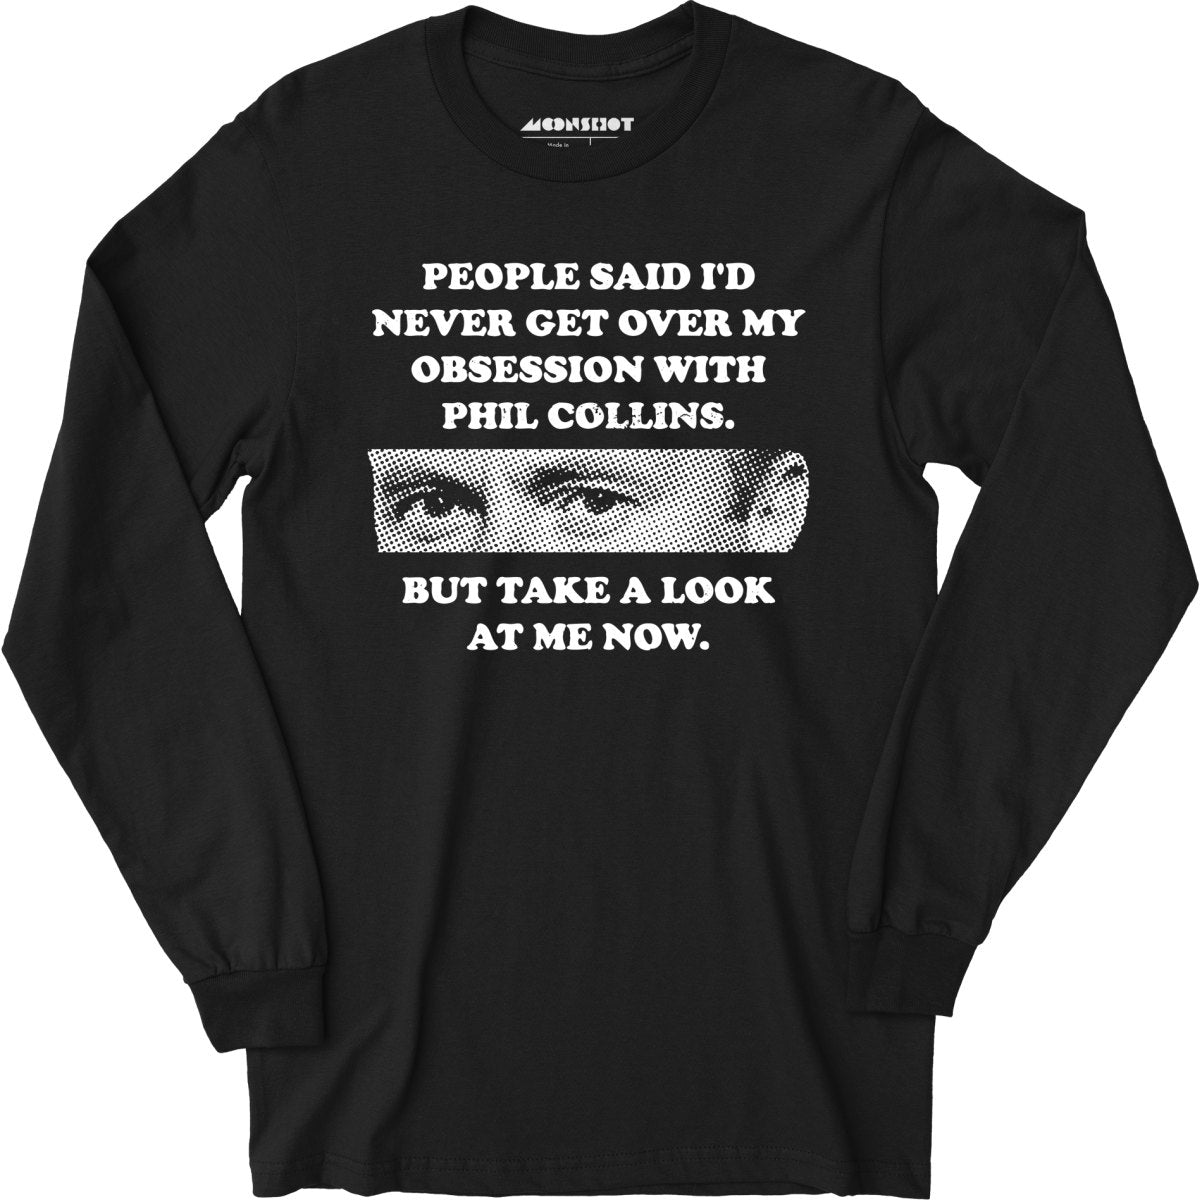 But Take a Look at Me Now - Long Sleeve T-Shirt